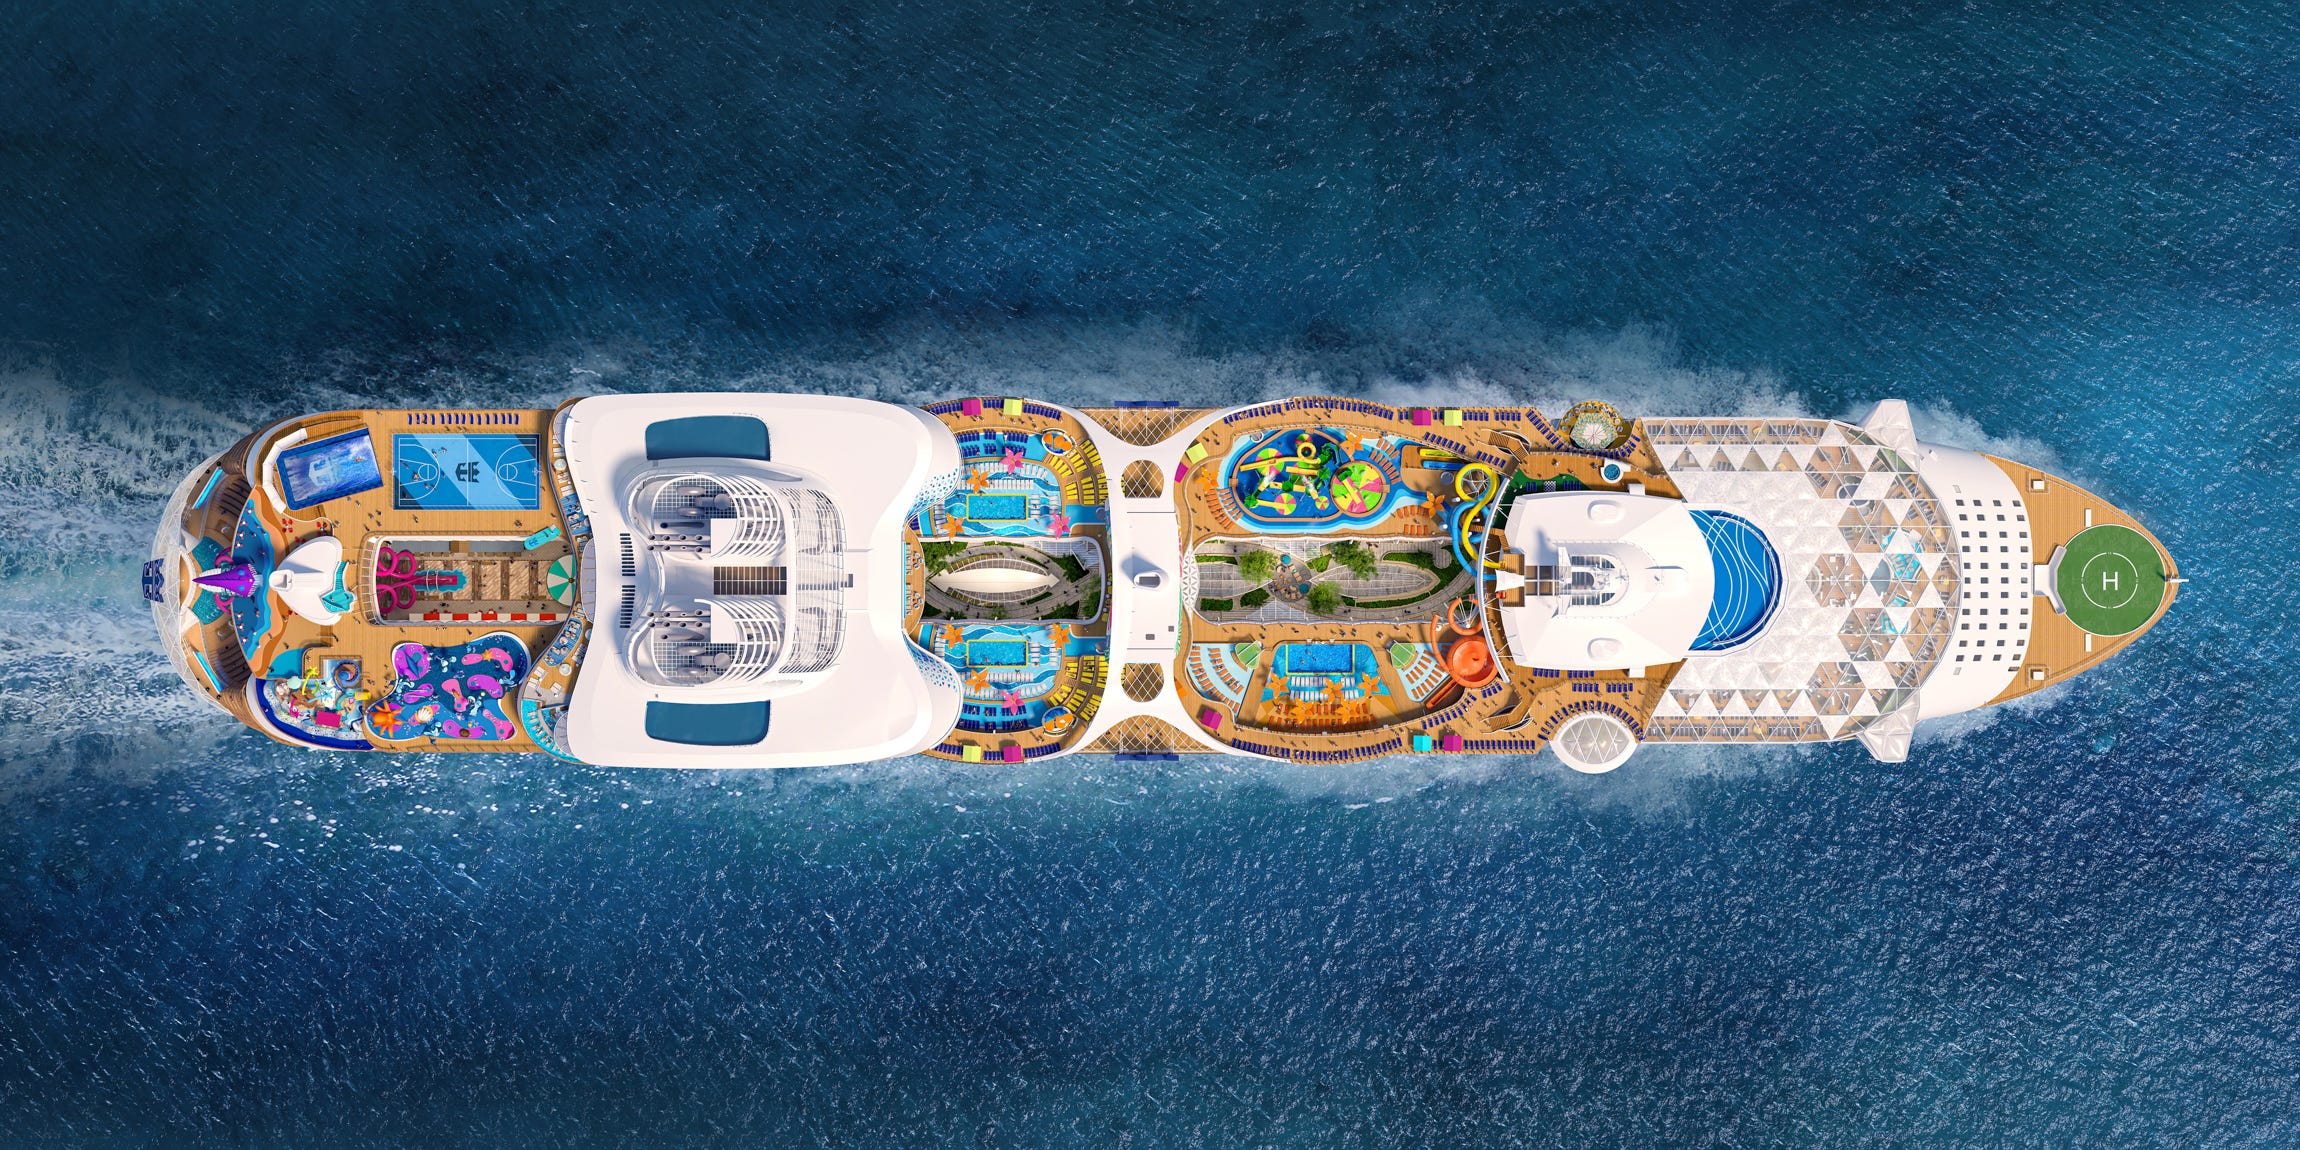 Royal Caribbean Just Launched The Worlds Largest Cruise Ship And Its Next Giant Vessel Is Only